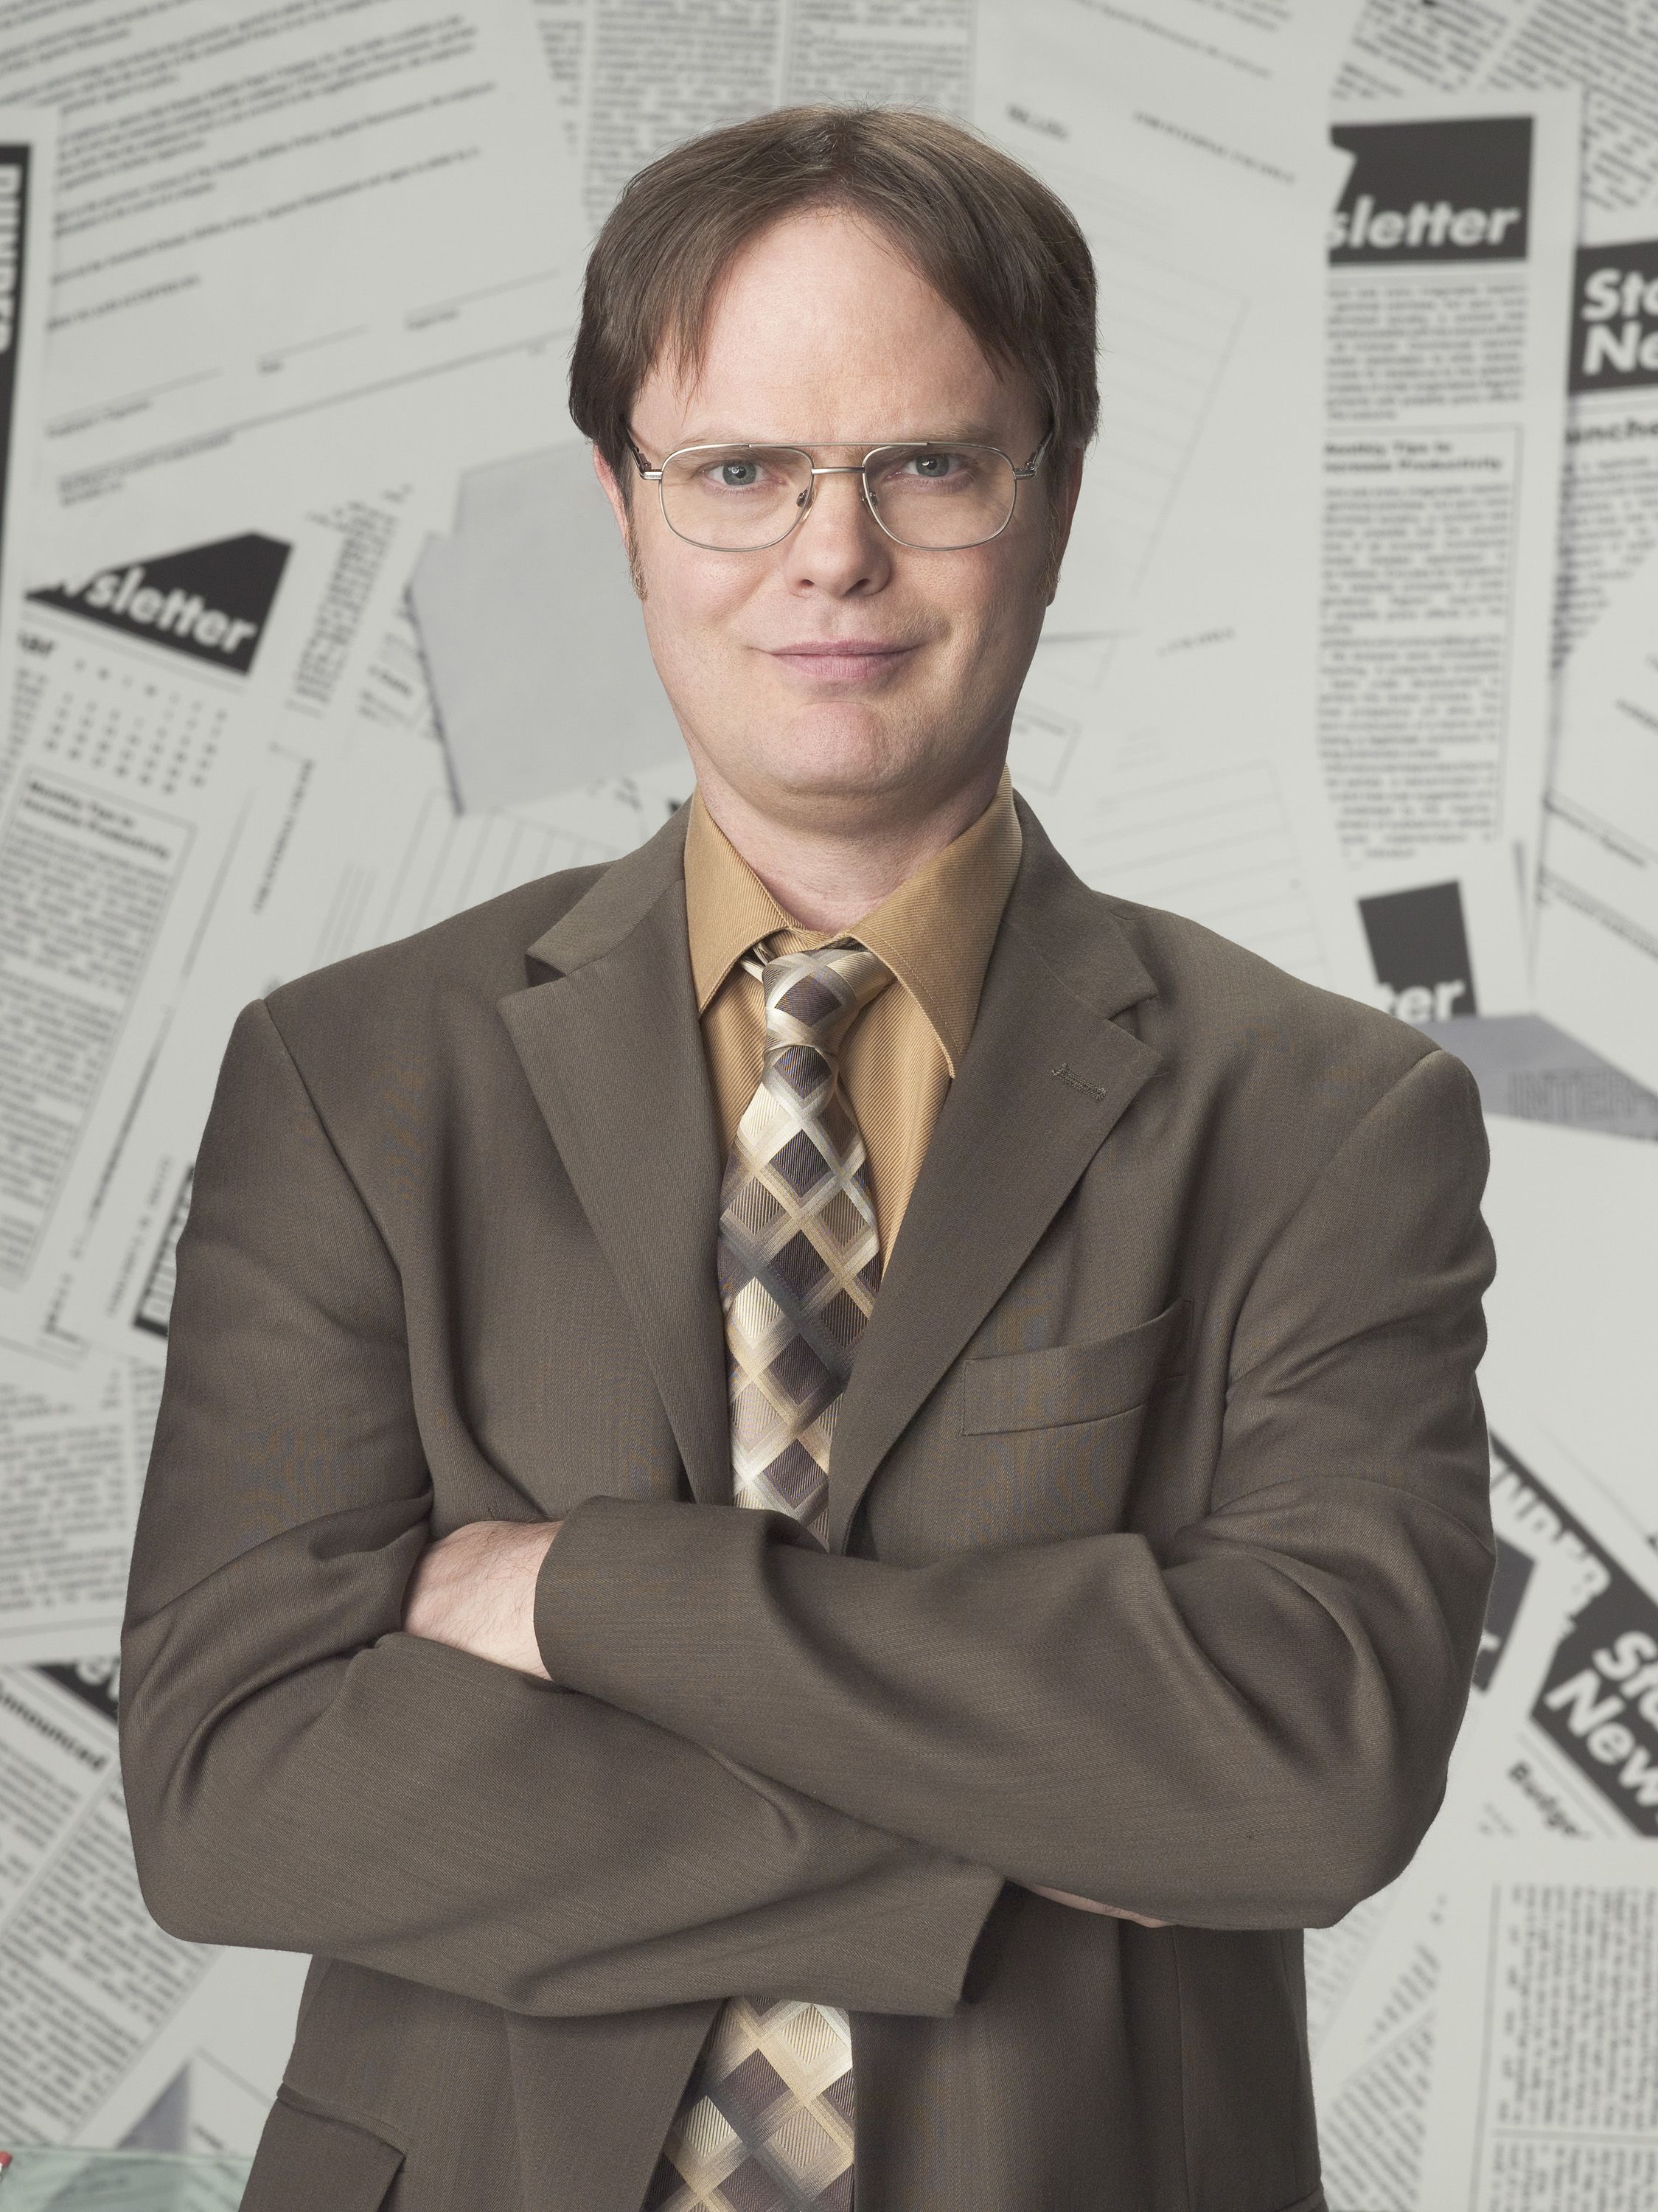 The office dwight schrute HD wallpapers  Pxfuel